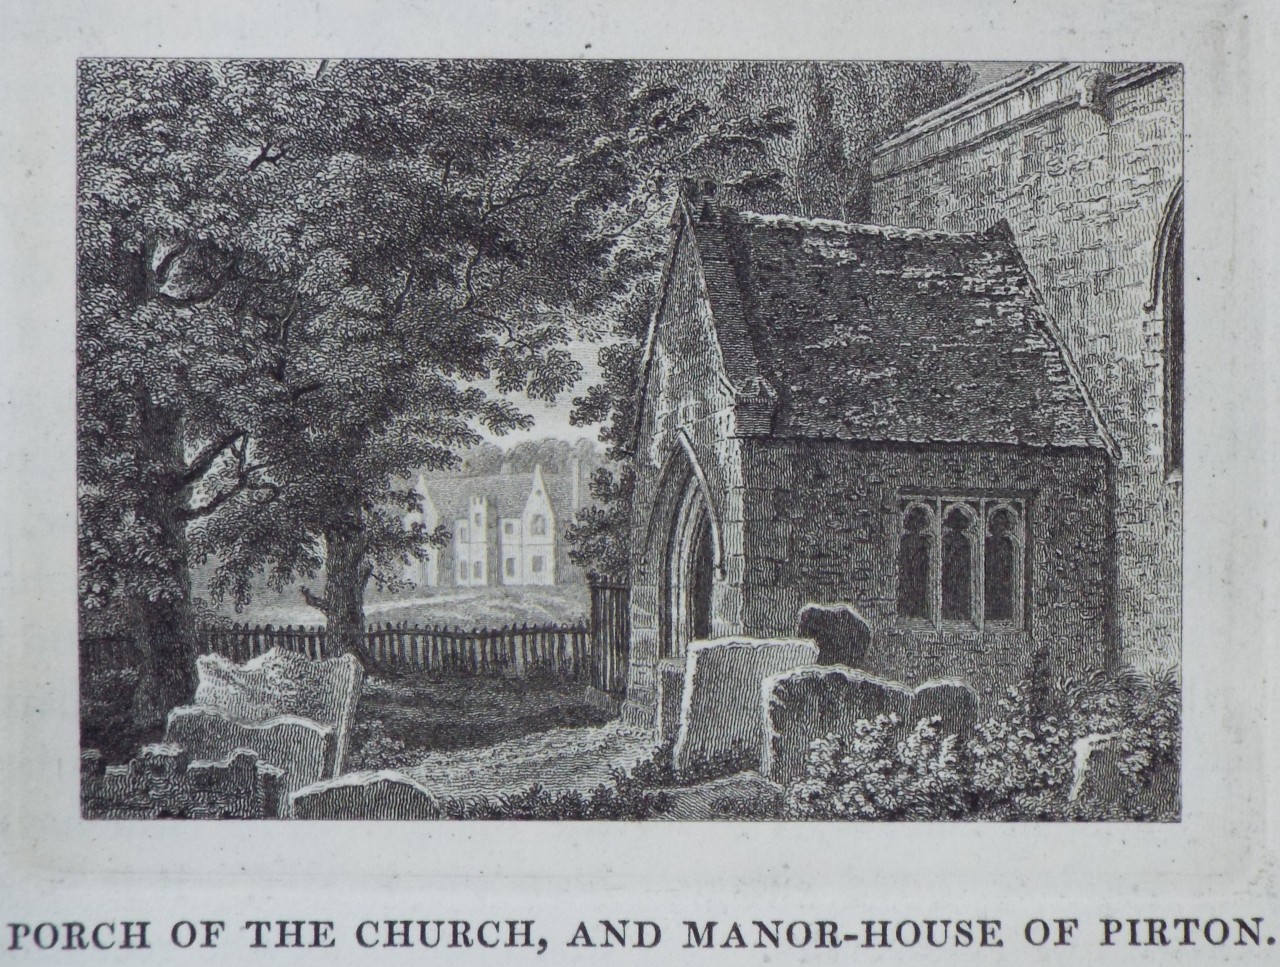 Print - Porch of the Church, and Manor-house of Pirton.